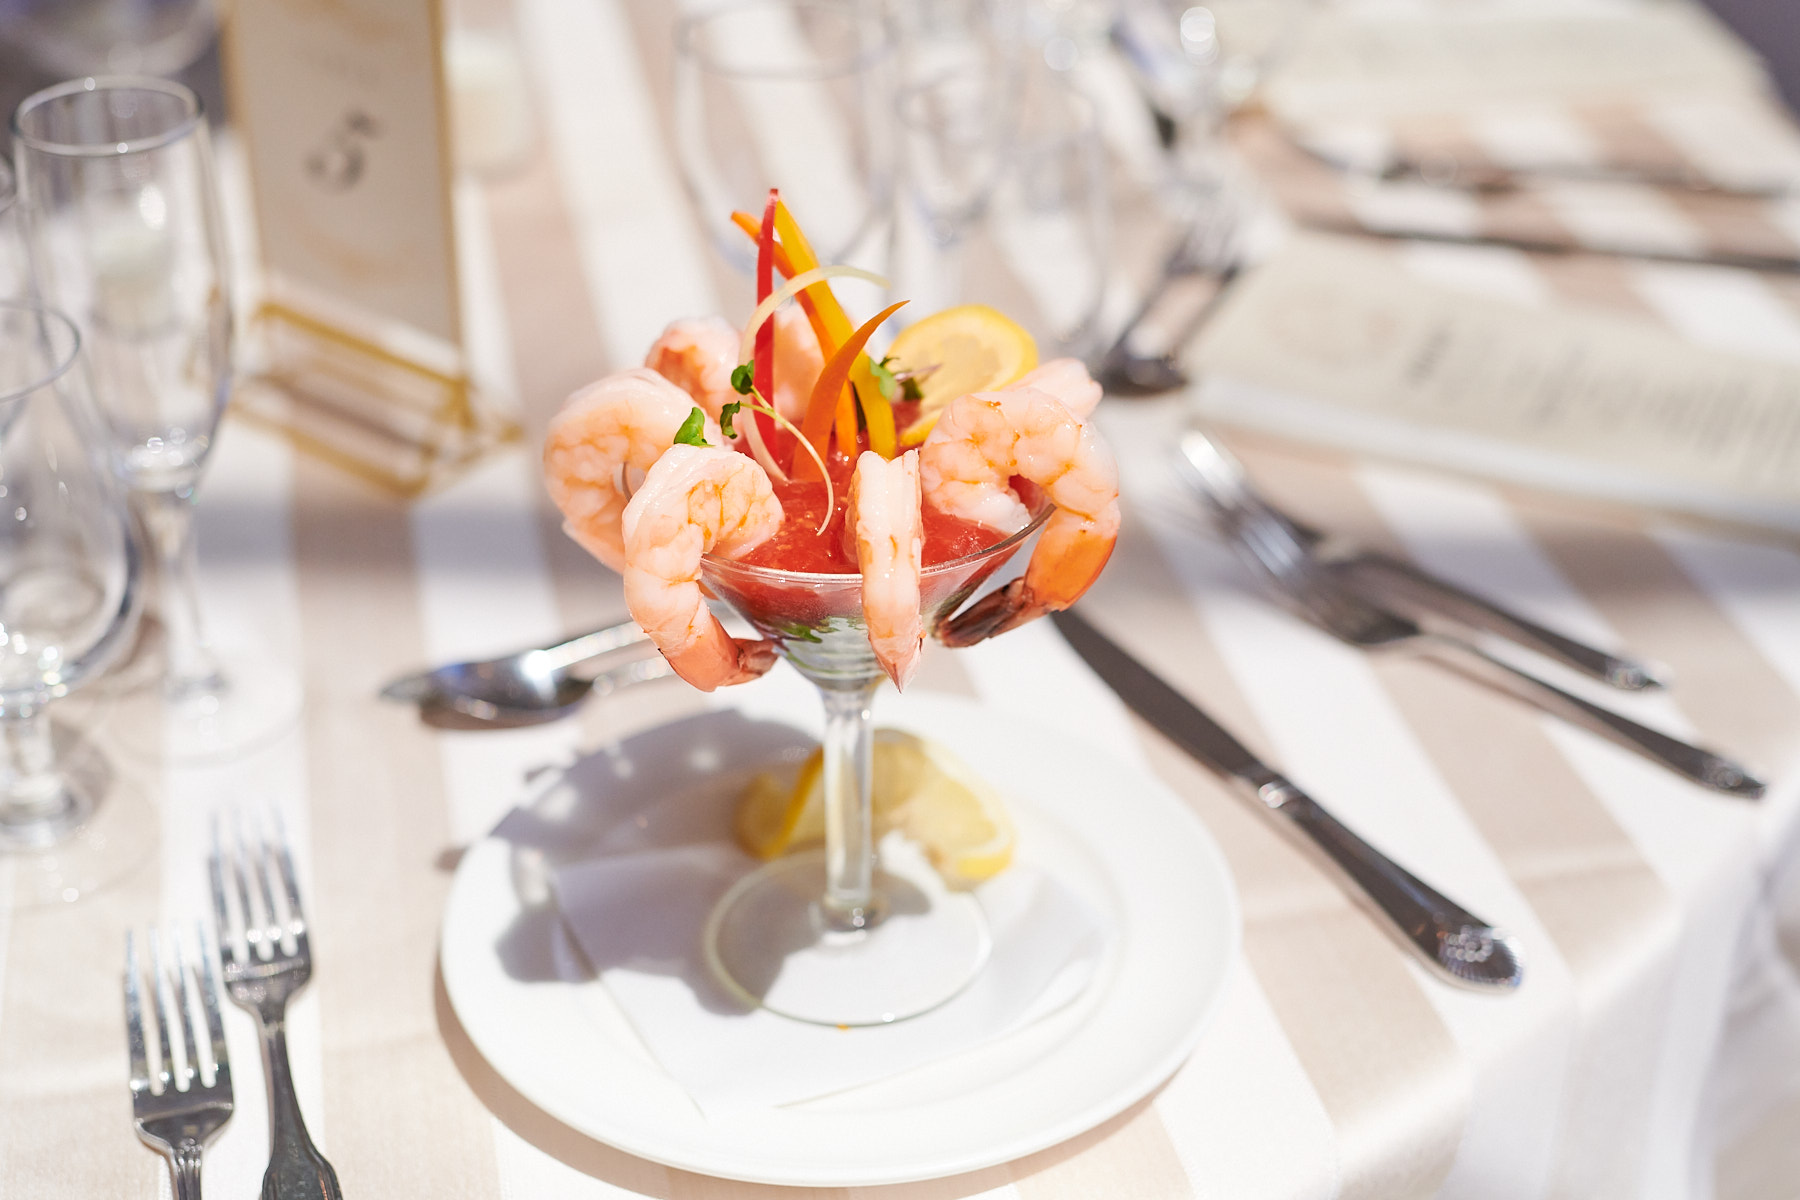 Shrimp cocktail for an event at Greentree Country Club